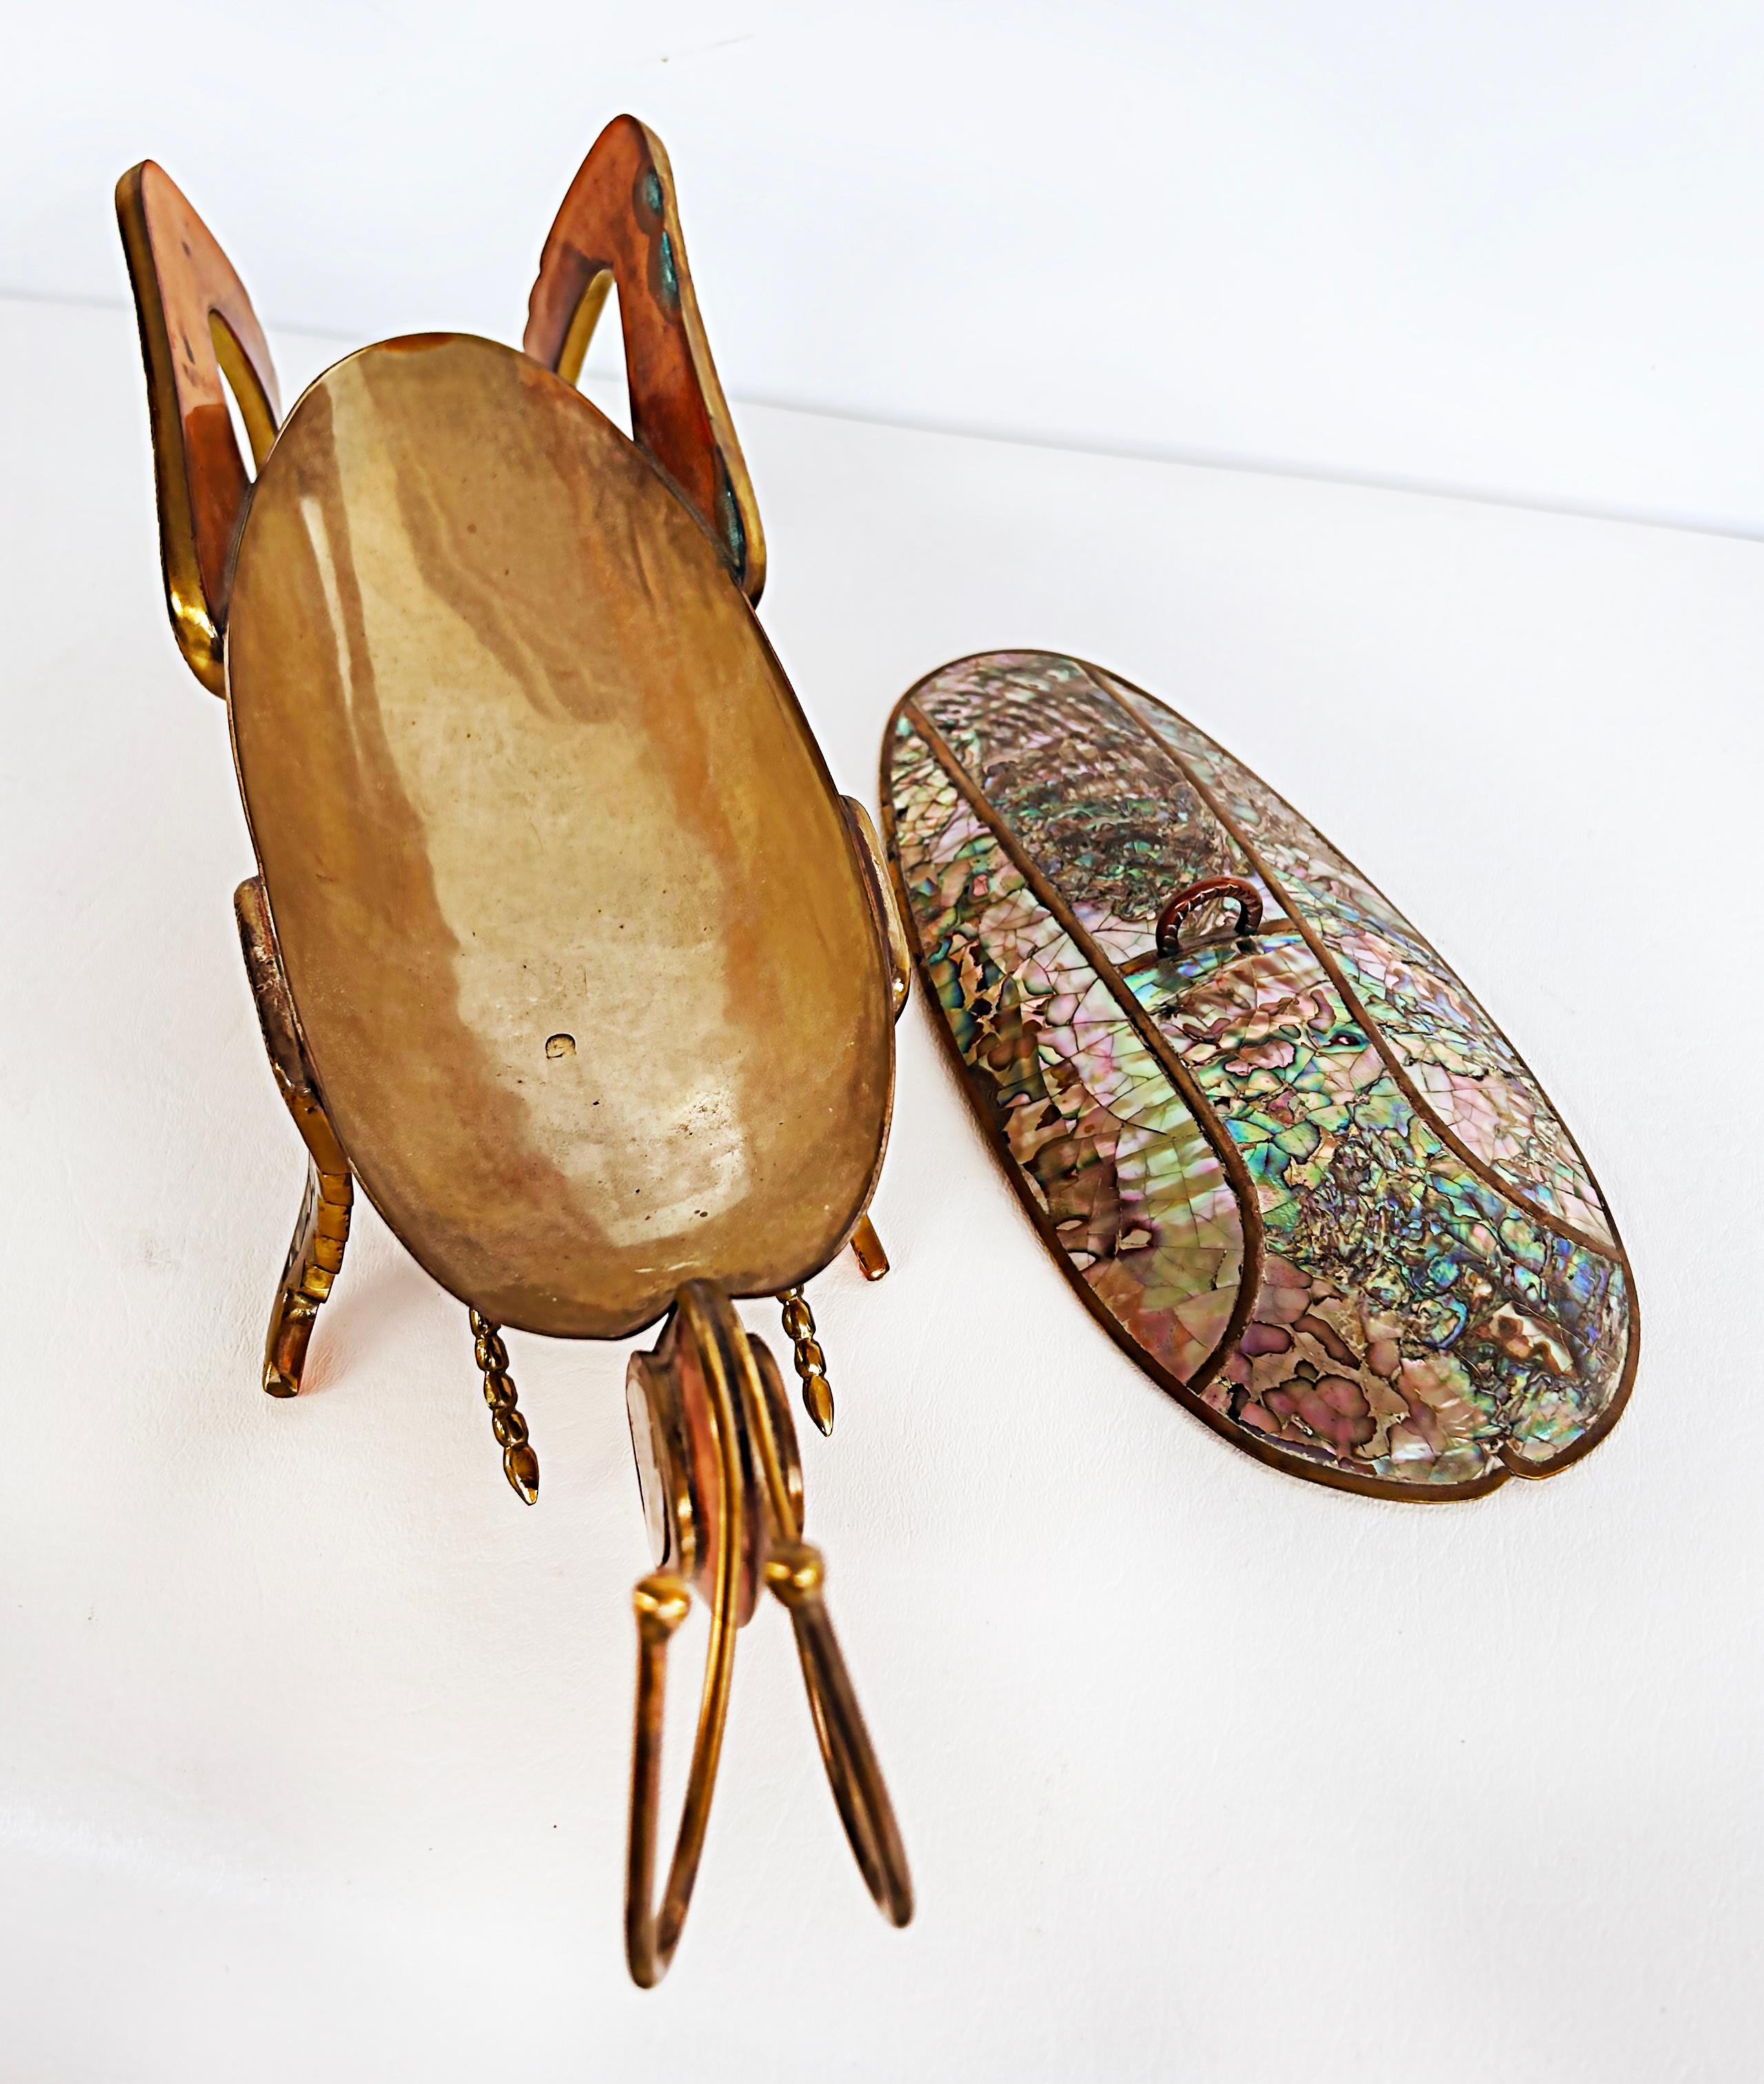 60s Mexican Mid-Century Abalone Shell Grasshopper Tray with Lid, Mixed Metals For Sale 4